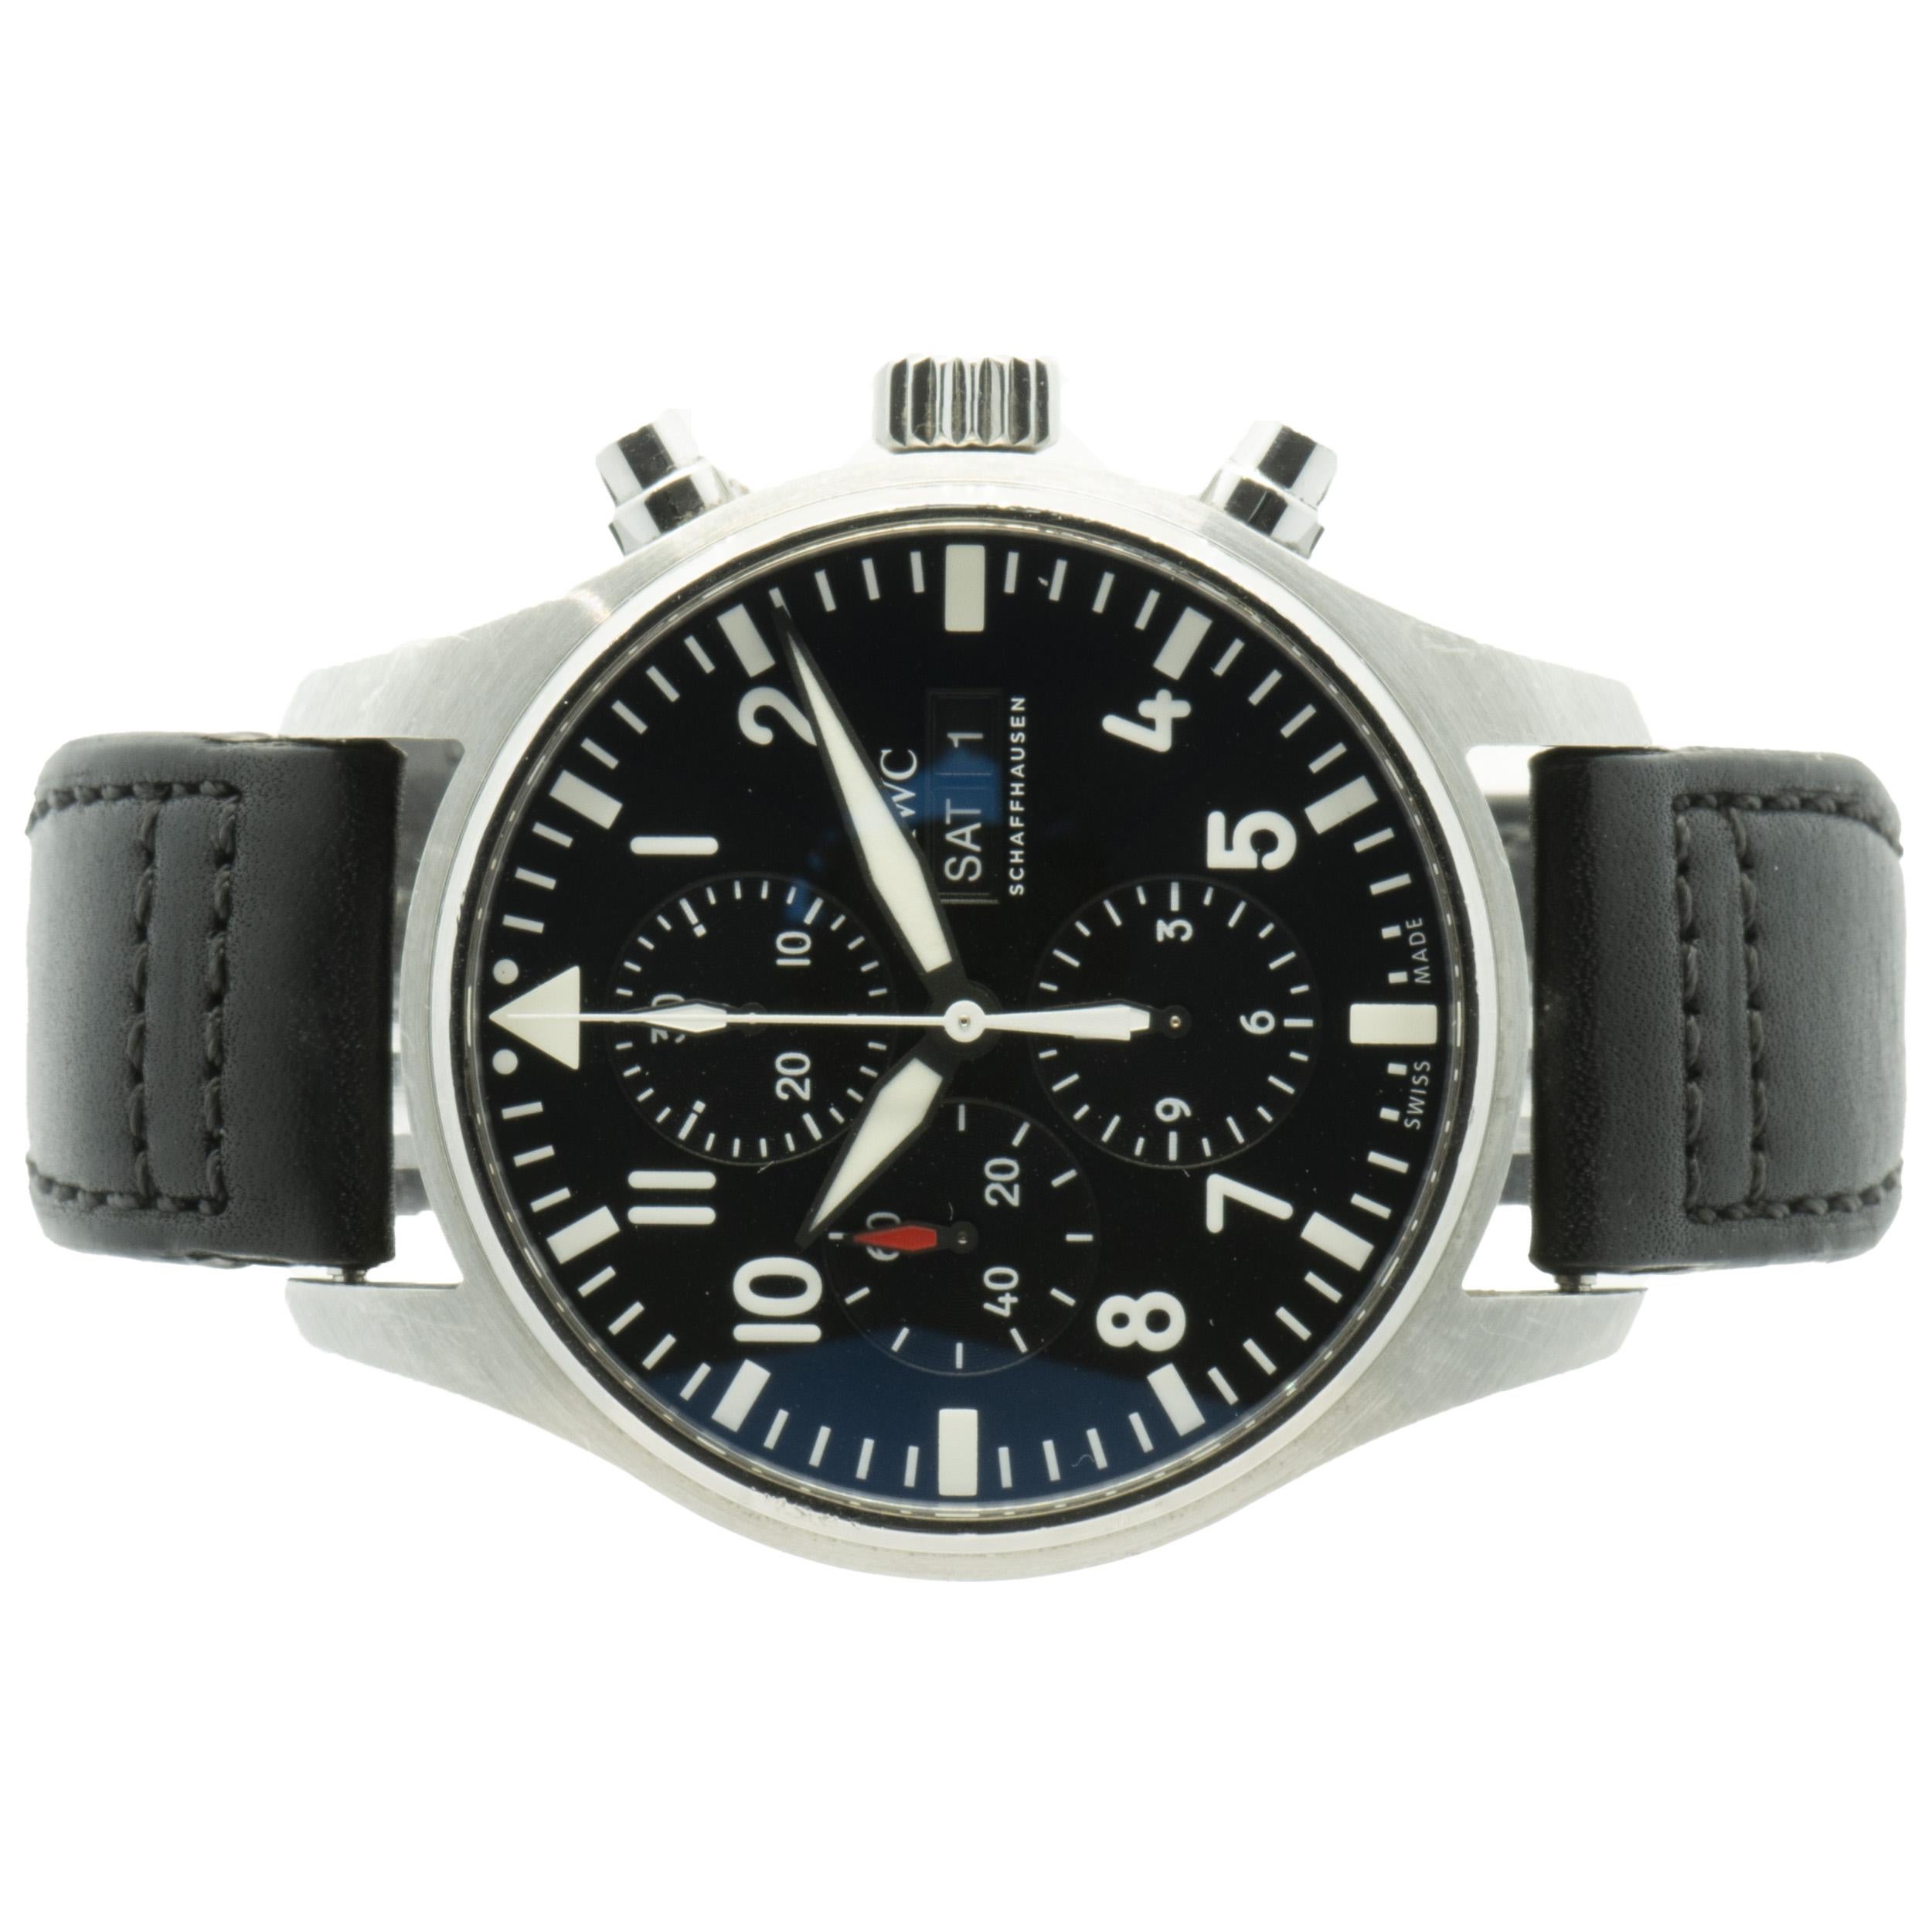 Brand: IWC
Movement: automatic
Function: hours, minutes, seconds, day, date, chronograph
Case: 43mm round case, sapphire crystal, push/pull crown, smooth bezel
Band: black IWC leather strap, buckle
Dial: black arabic/chronograph
Reference #: